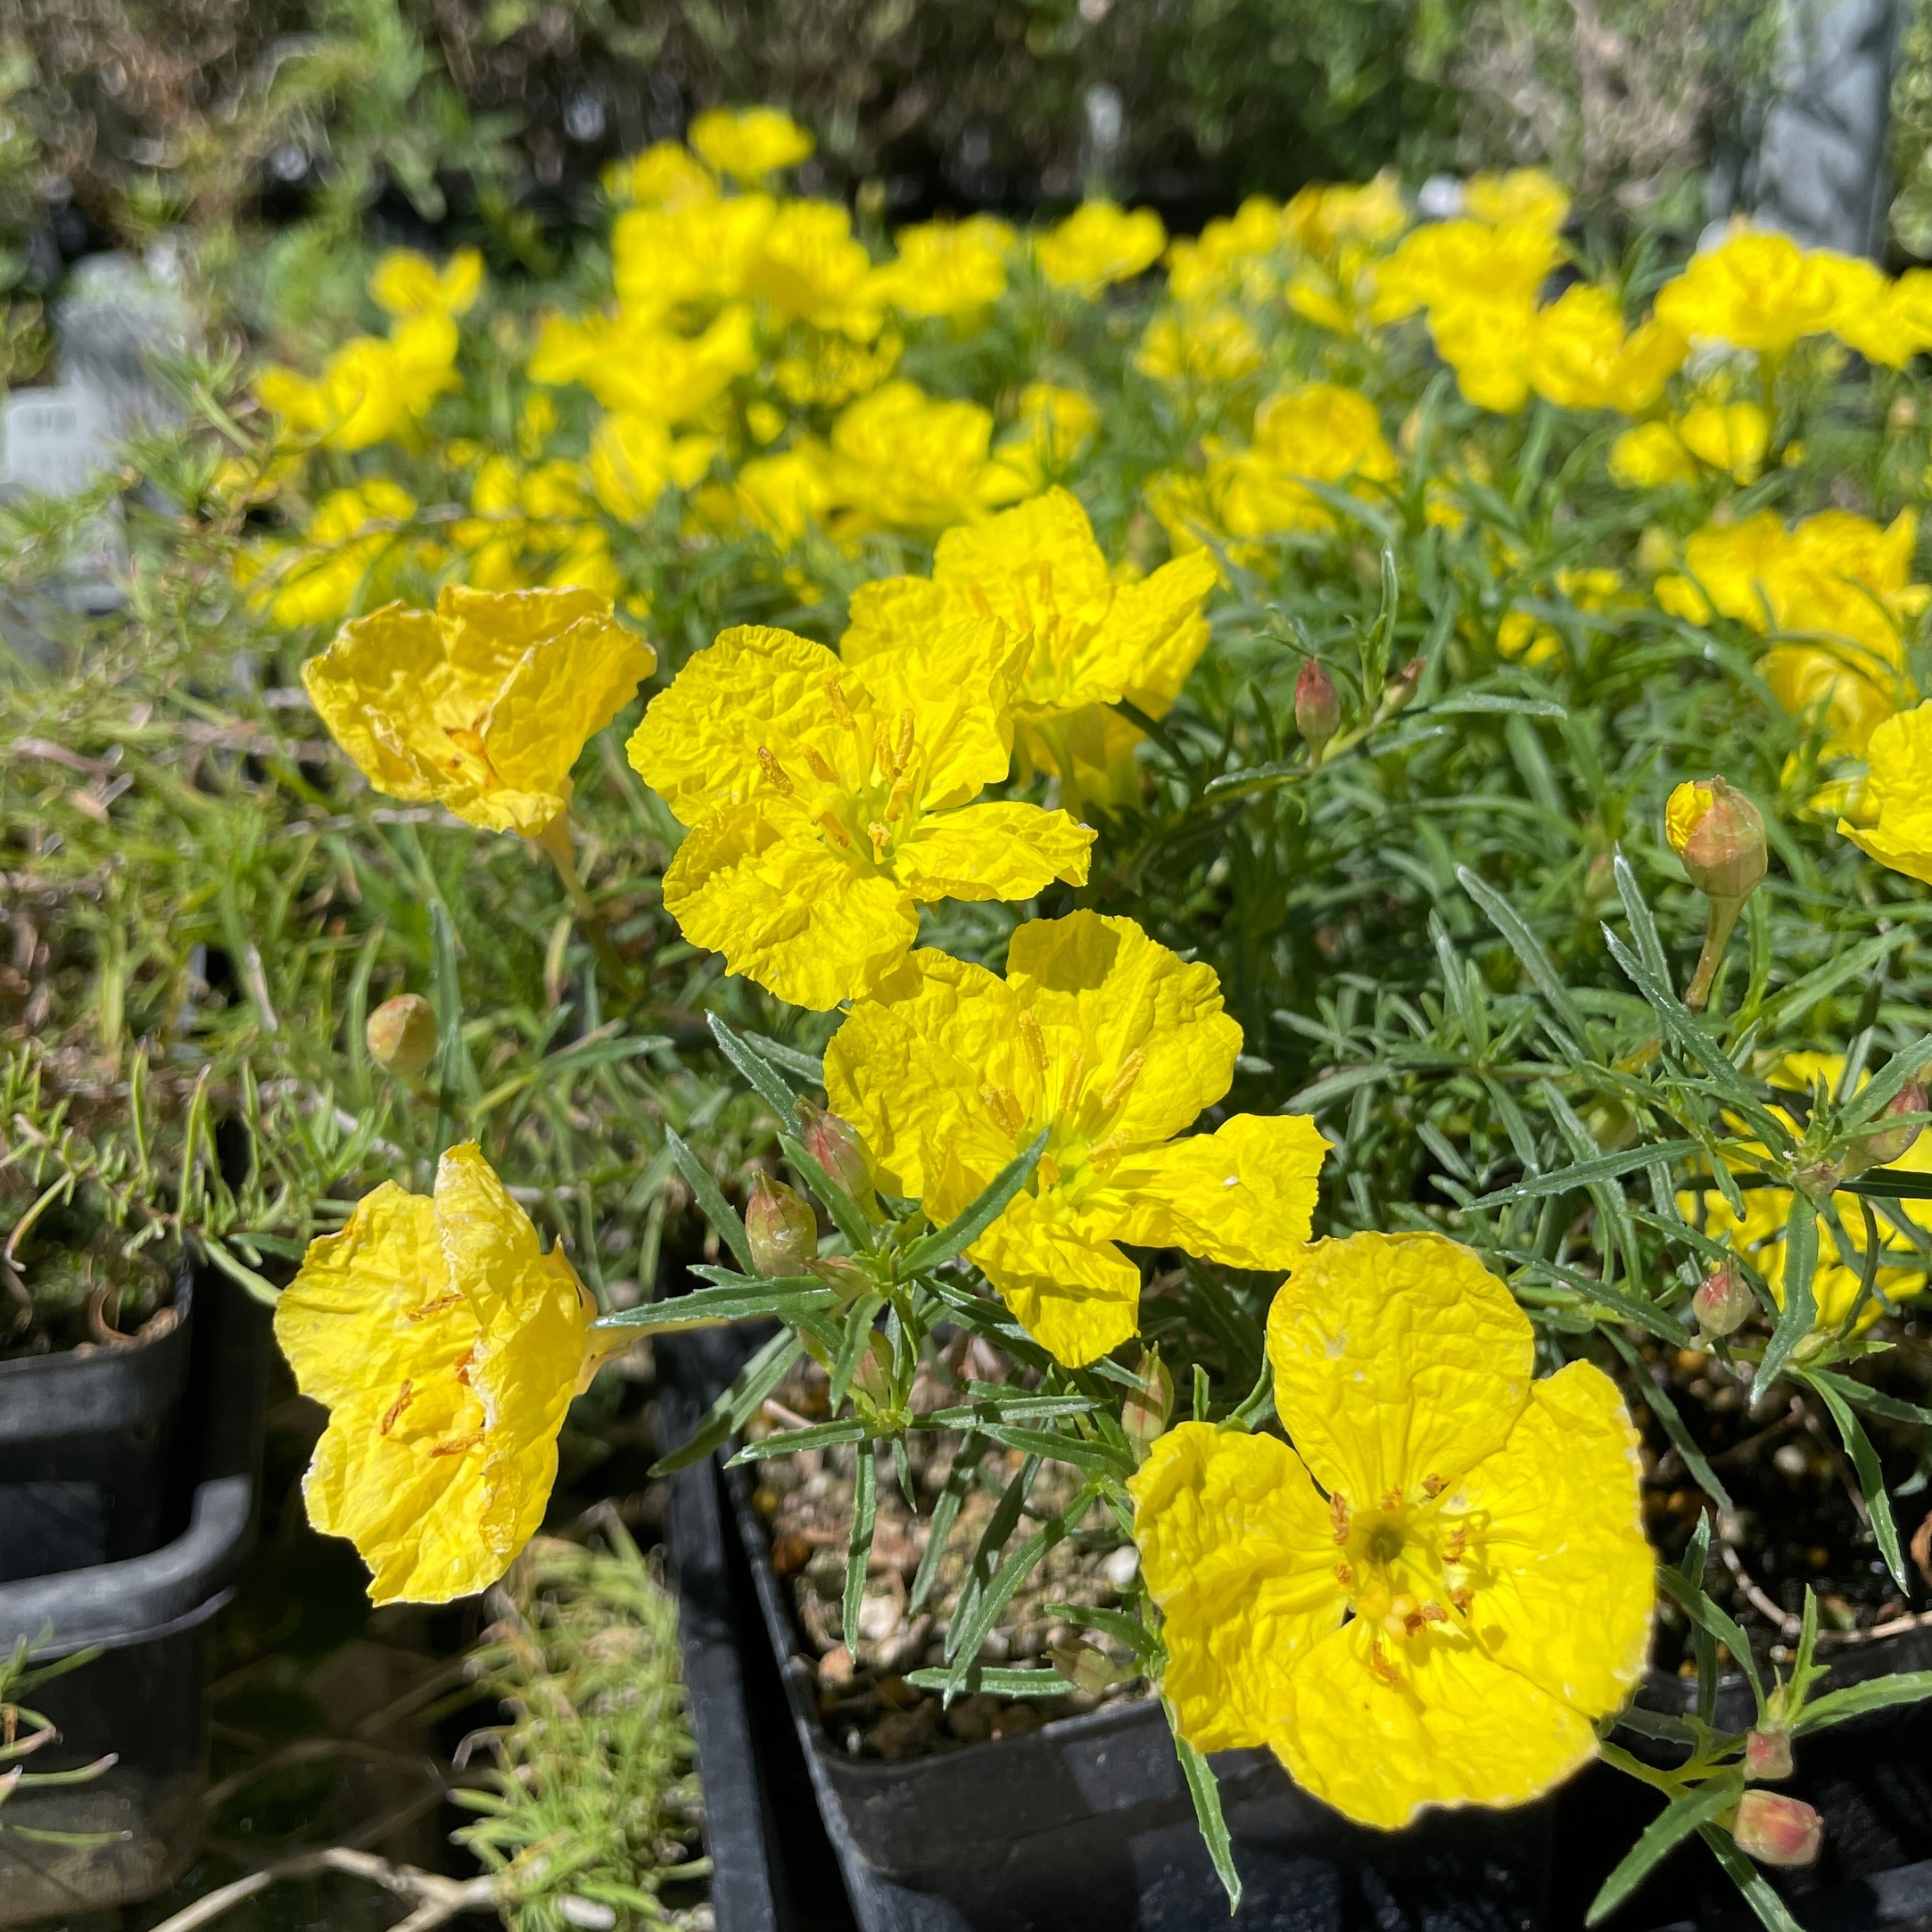 Plant with crepe paper-like yellow flowers